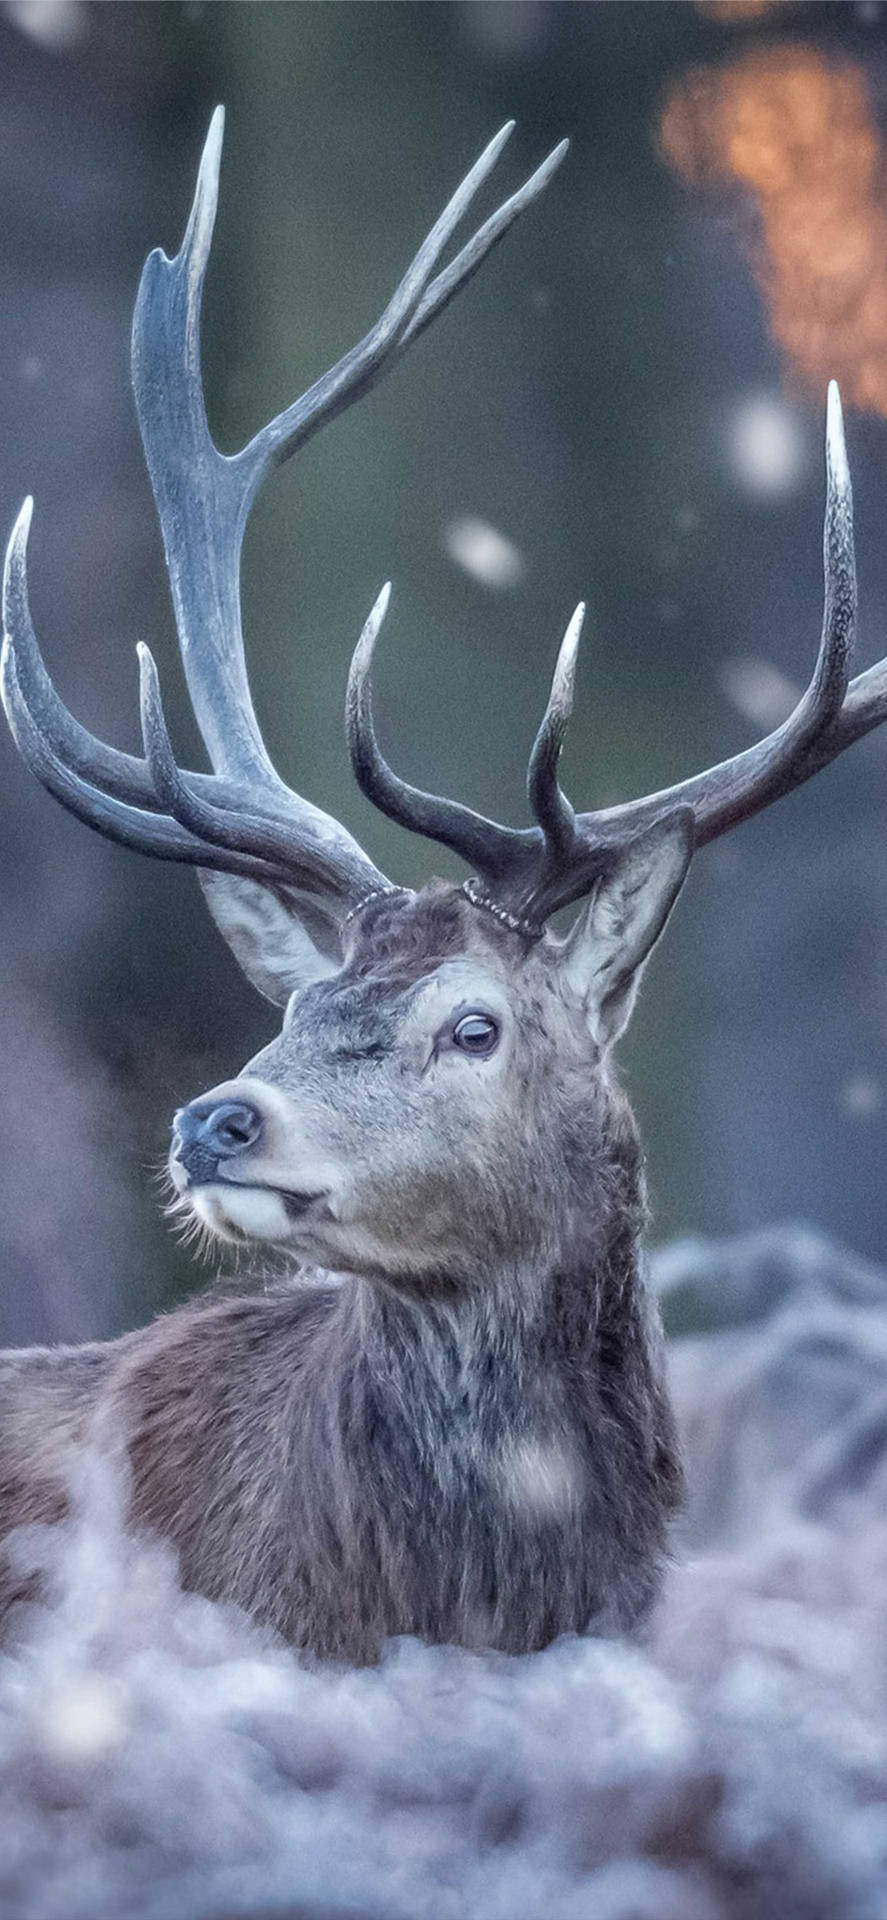 Embrace Nature with the Deer Iphone Wallpaper